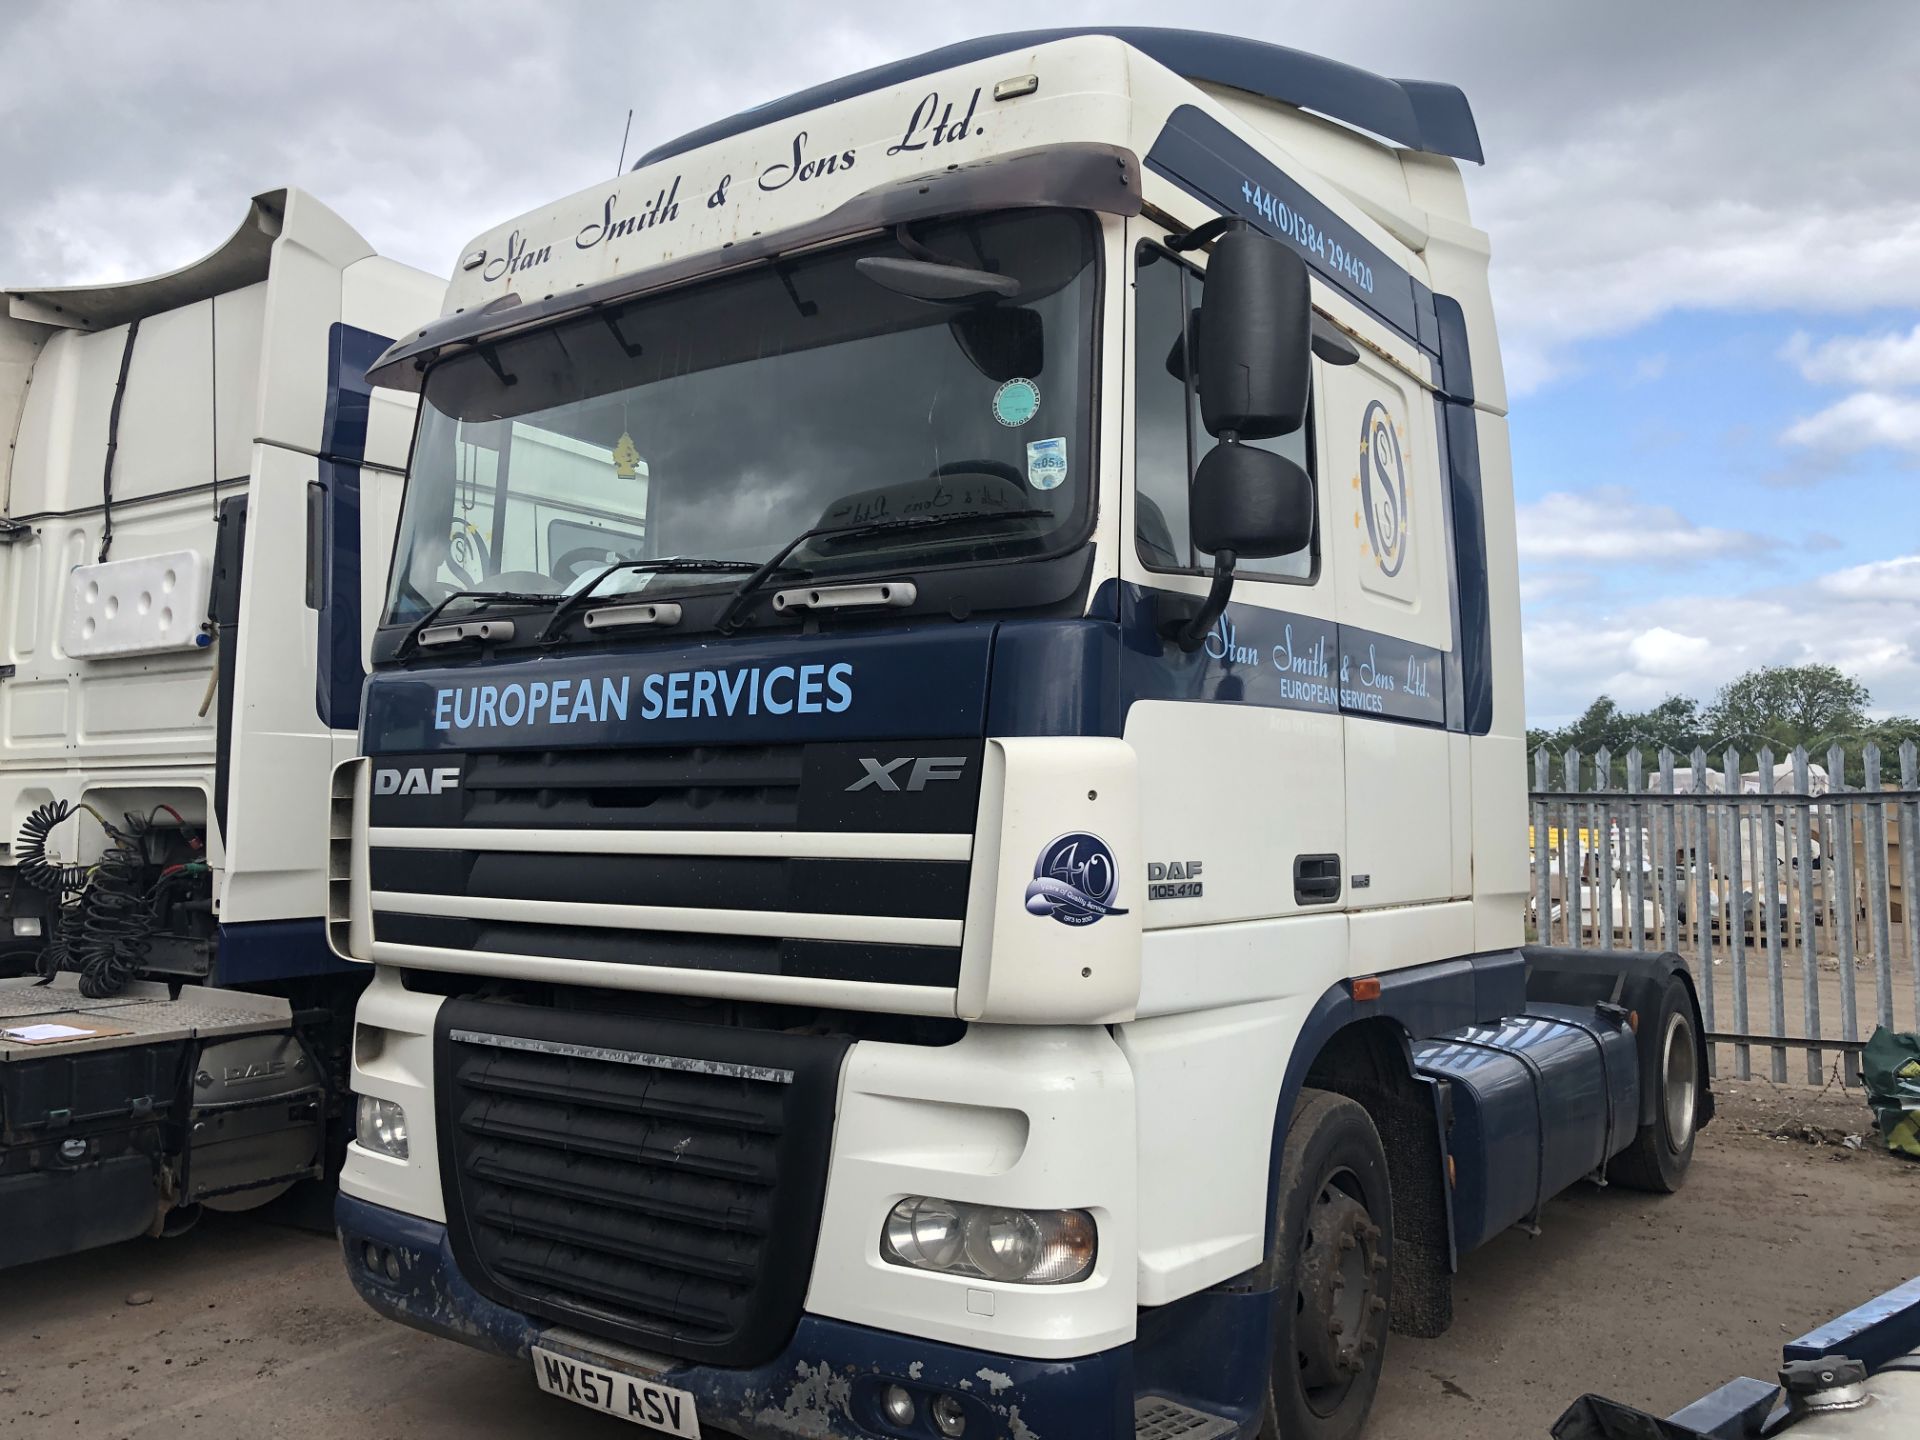 DAF FT 105 XF 410 LD SP Euro 5, 4 x 2 Space Cab Tractor Unit , Recorded Usage 661,131 KM, - Image 4 of 33